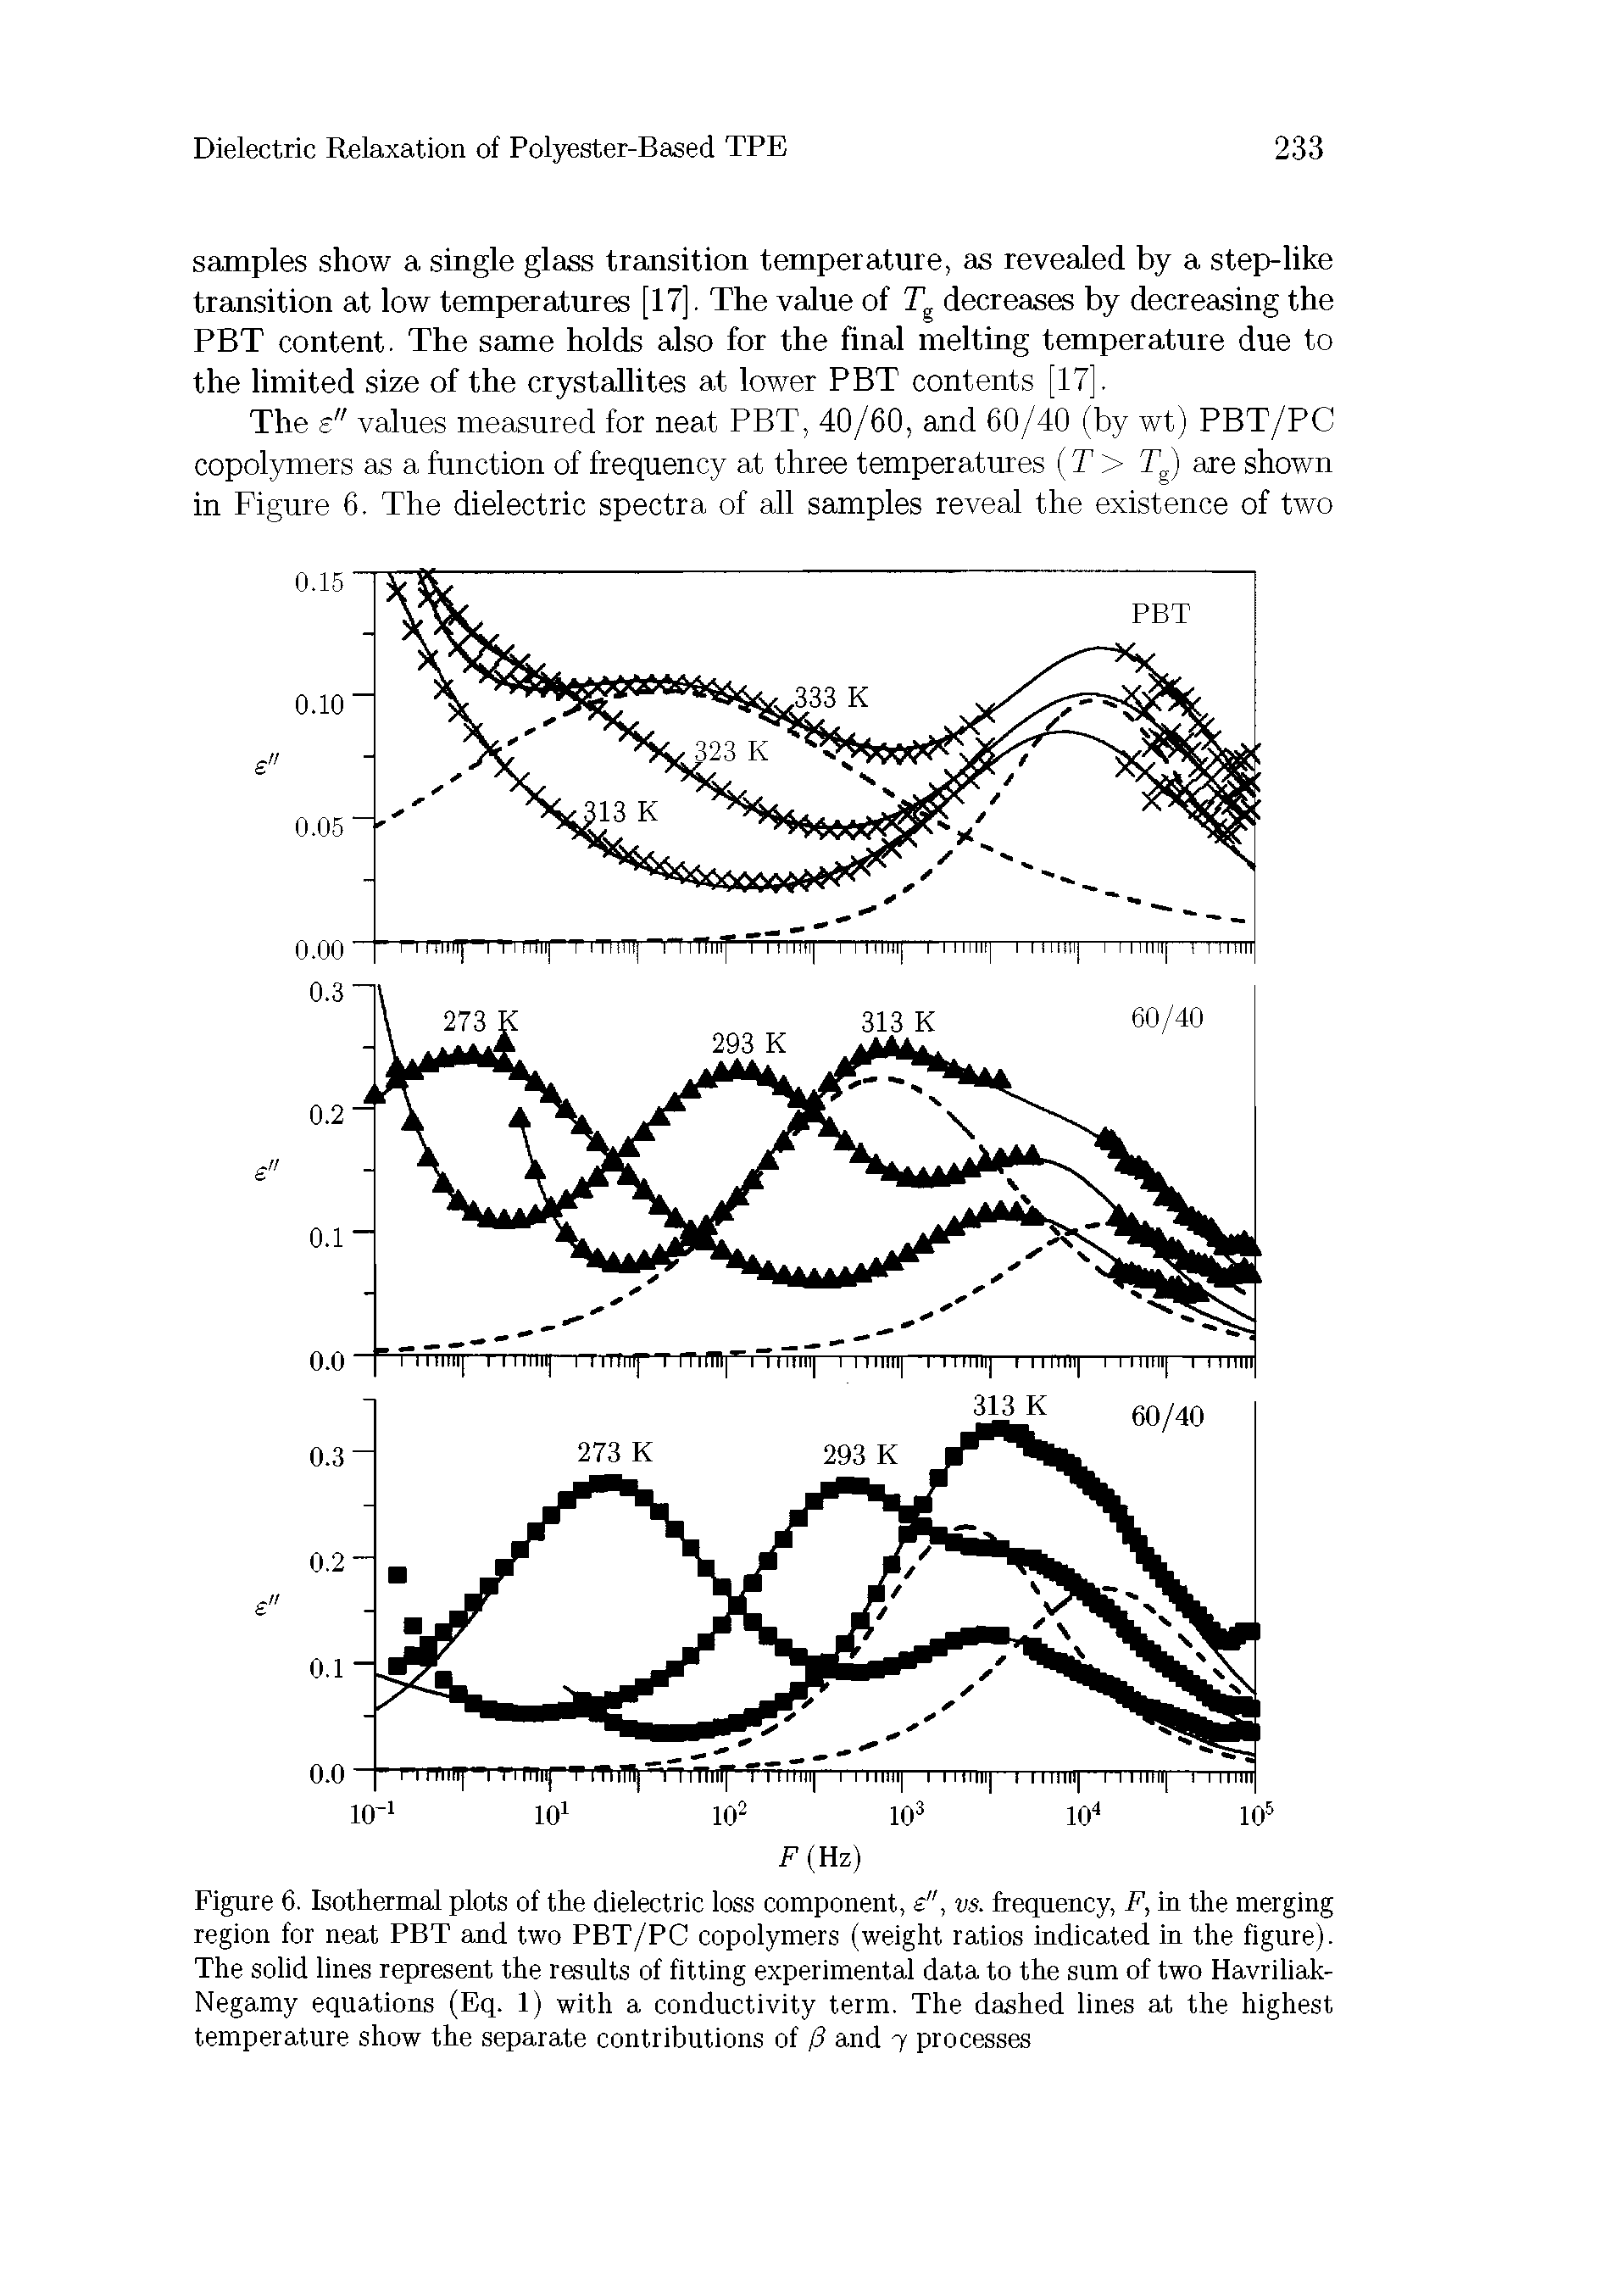 Figure 6. Isothermal plots of the dielectric loss component, e , vs. frequency, P, in the merging region for neat PBT and two PBT/PC copolymers (weight ratios indicated in the figure). The solid lines represent the results of fitting experimental data to the sum of two Havriliak-Negamy equations (Eq. 1) -ith a conductivity term. The dashed lines at the highest temperature show the separate contributions of (3 and 7 processes...